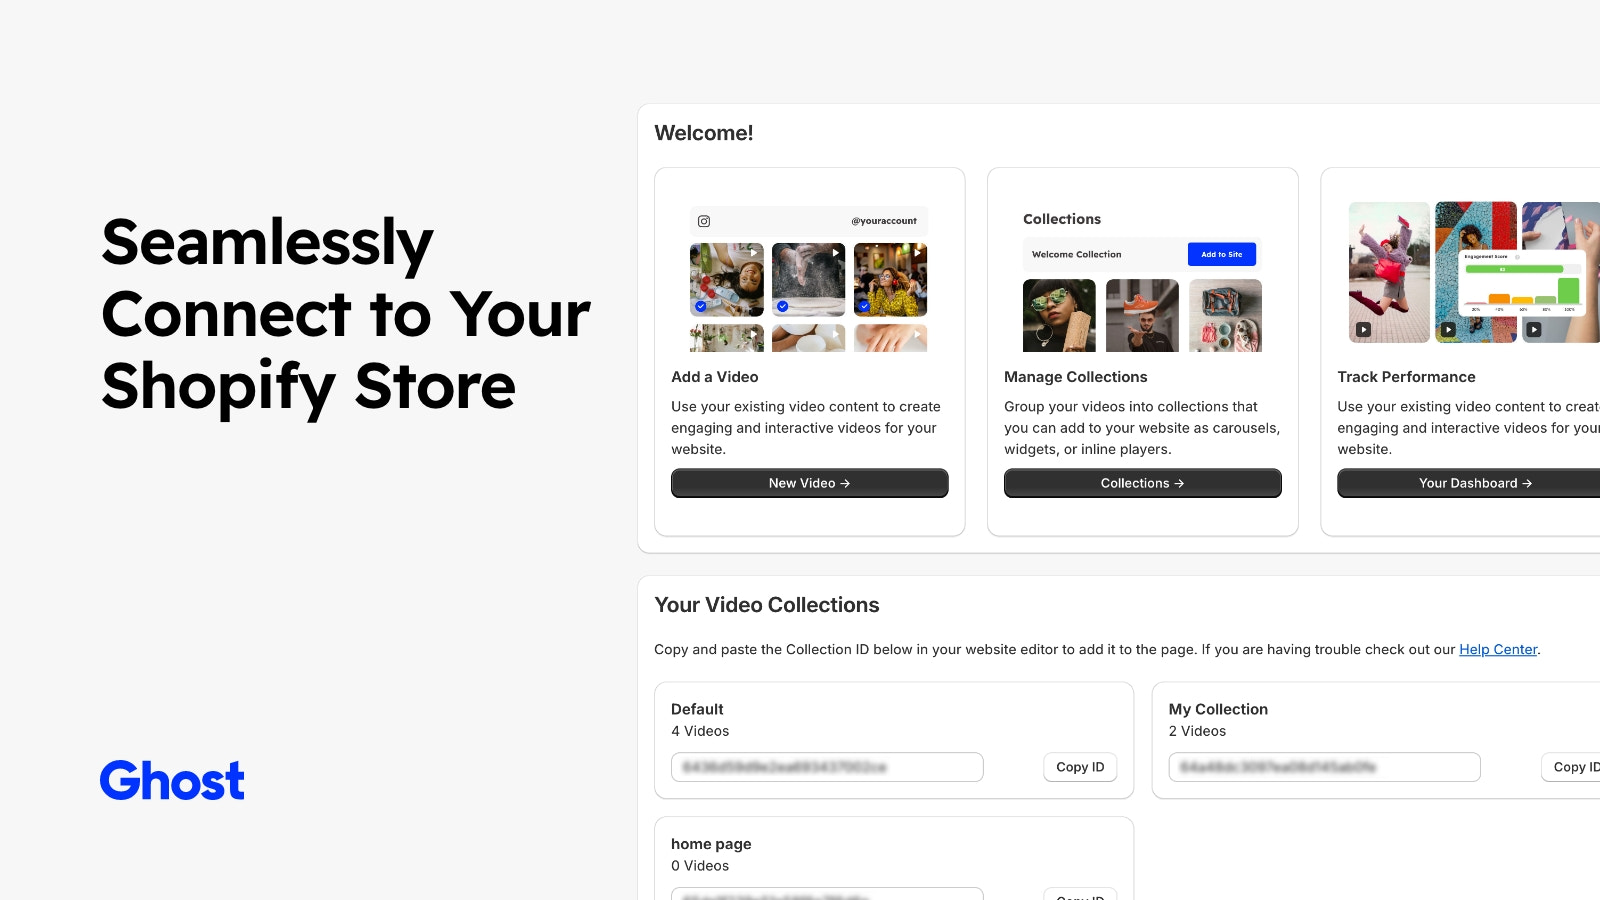 Seamlessly Connect to Your Shopify Store